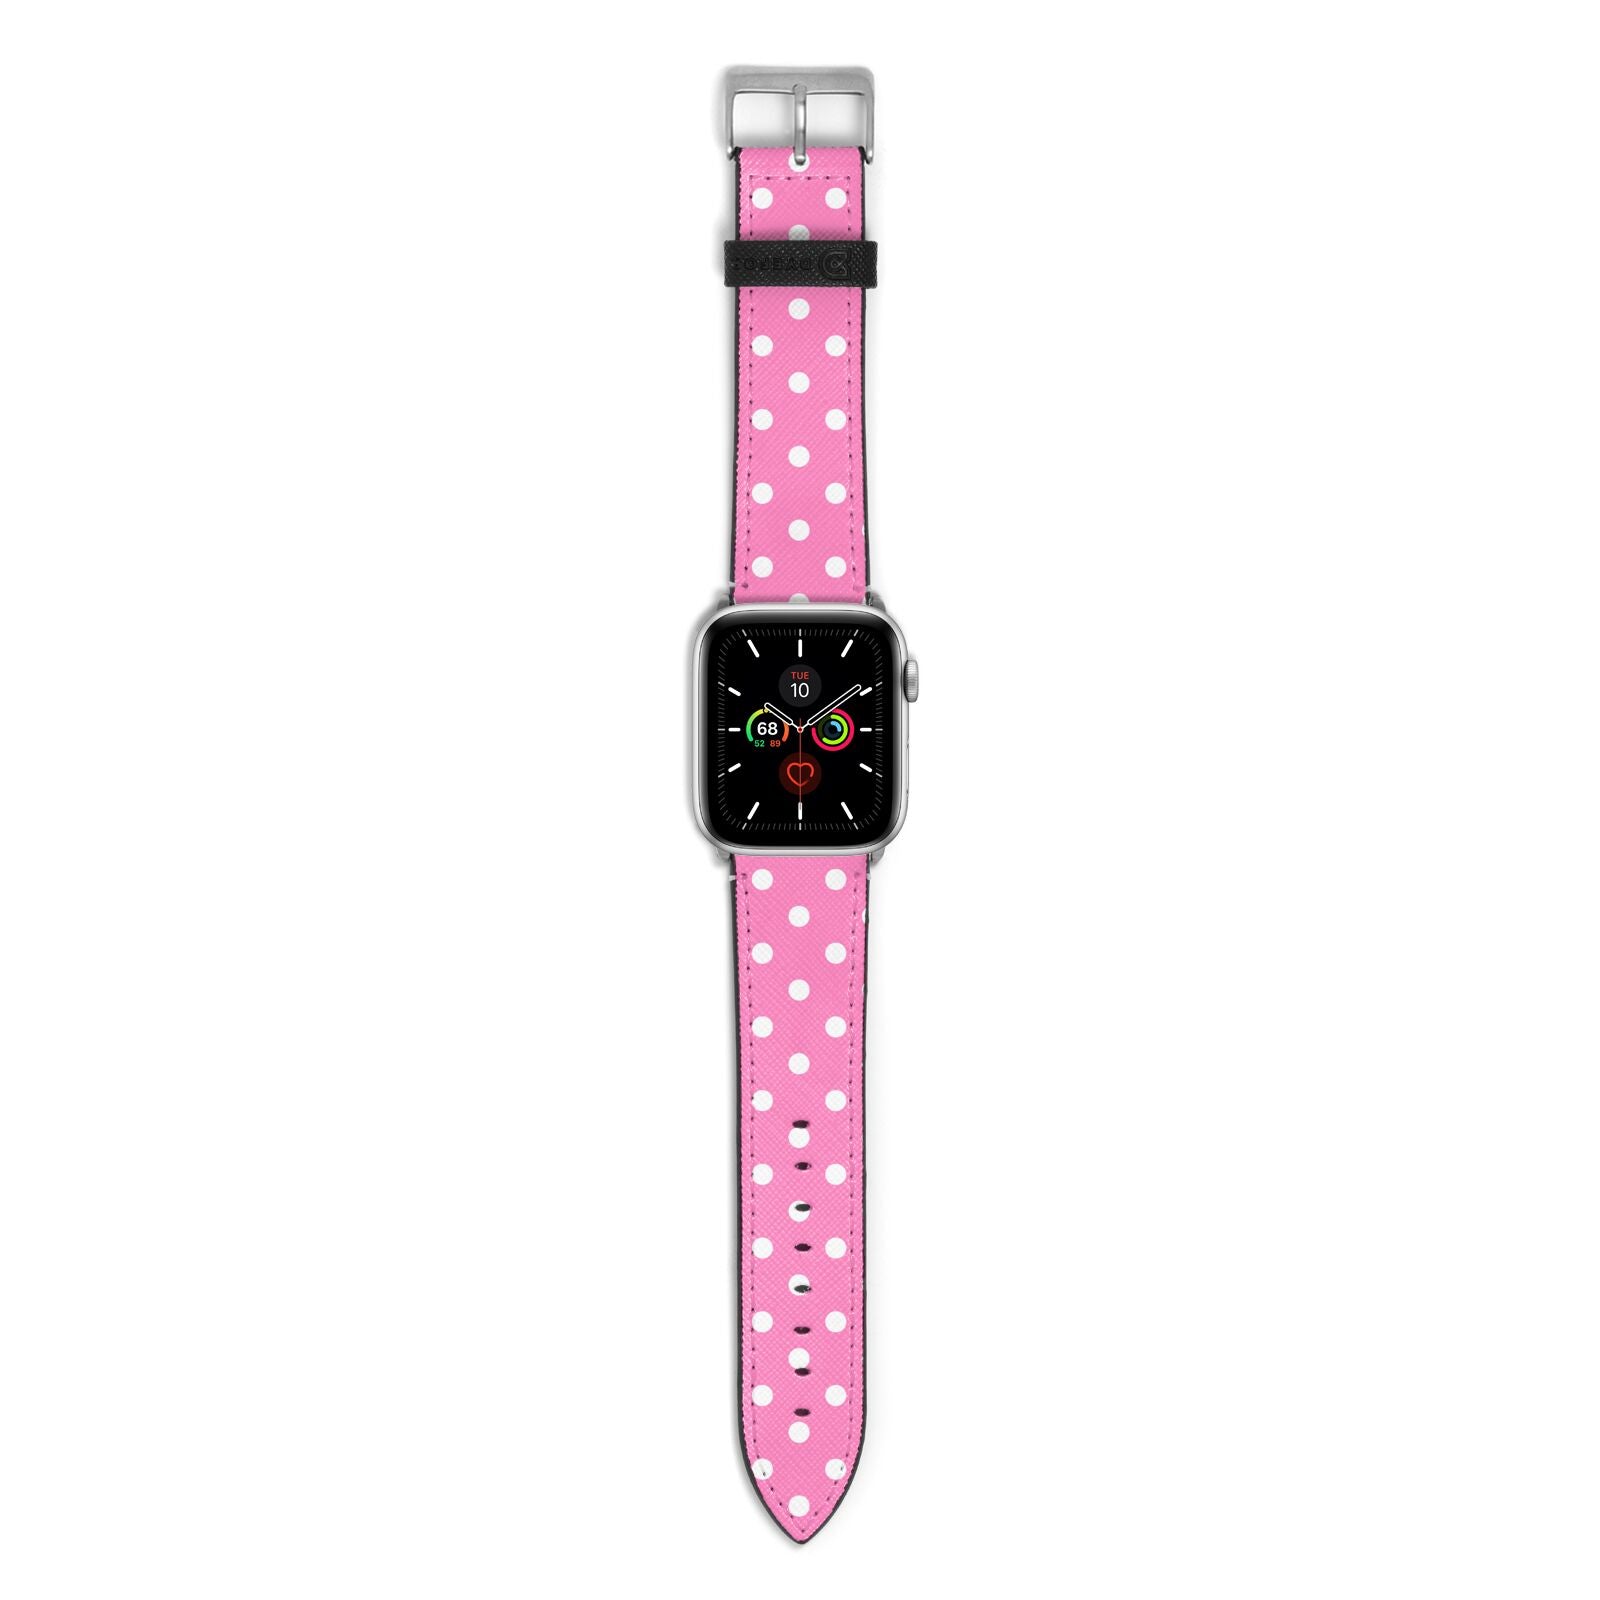 Pink Polka Dot Apple Watch Strap with Silver Hardware